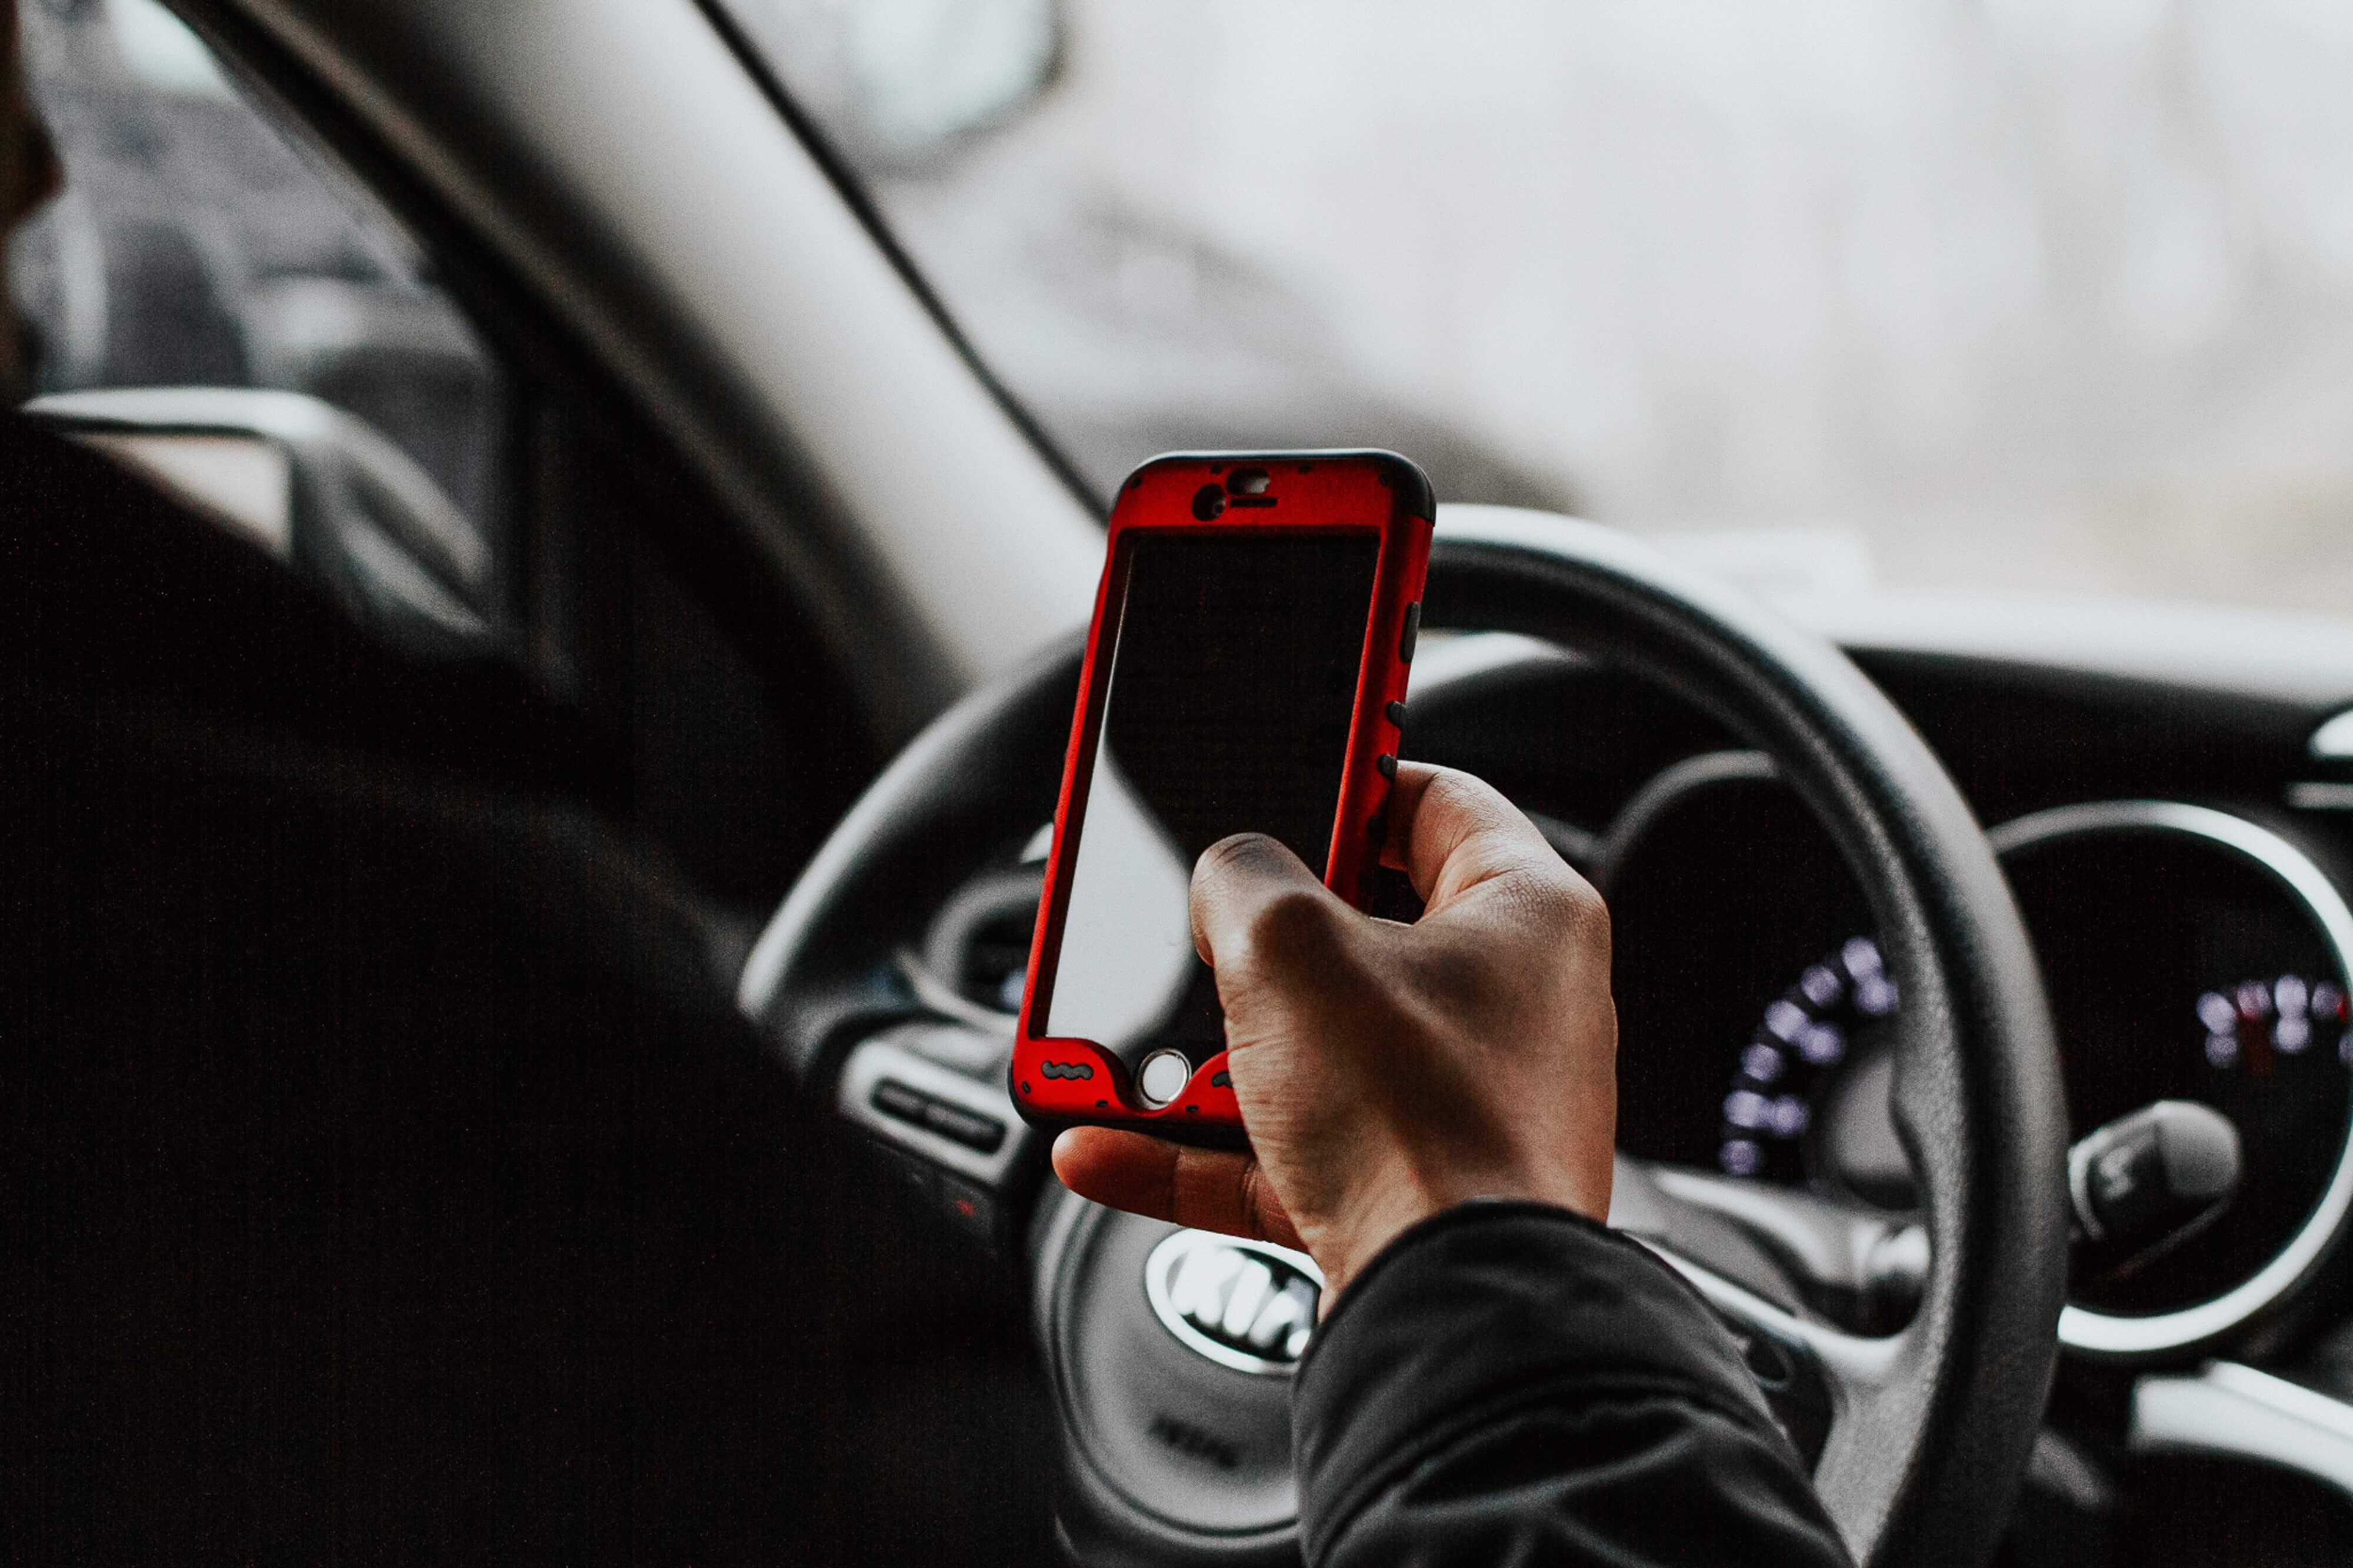 Young drivers, distracted drivers: an Irish study